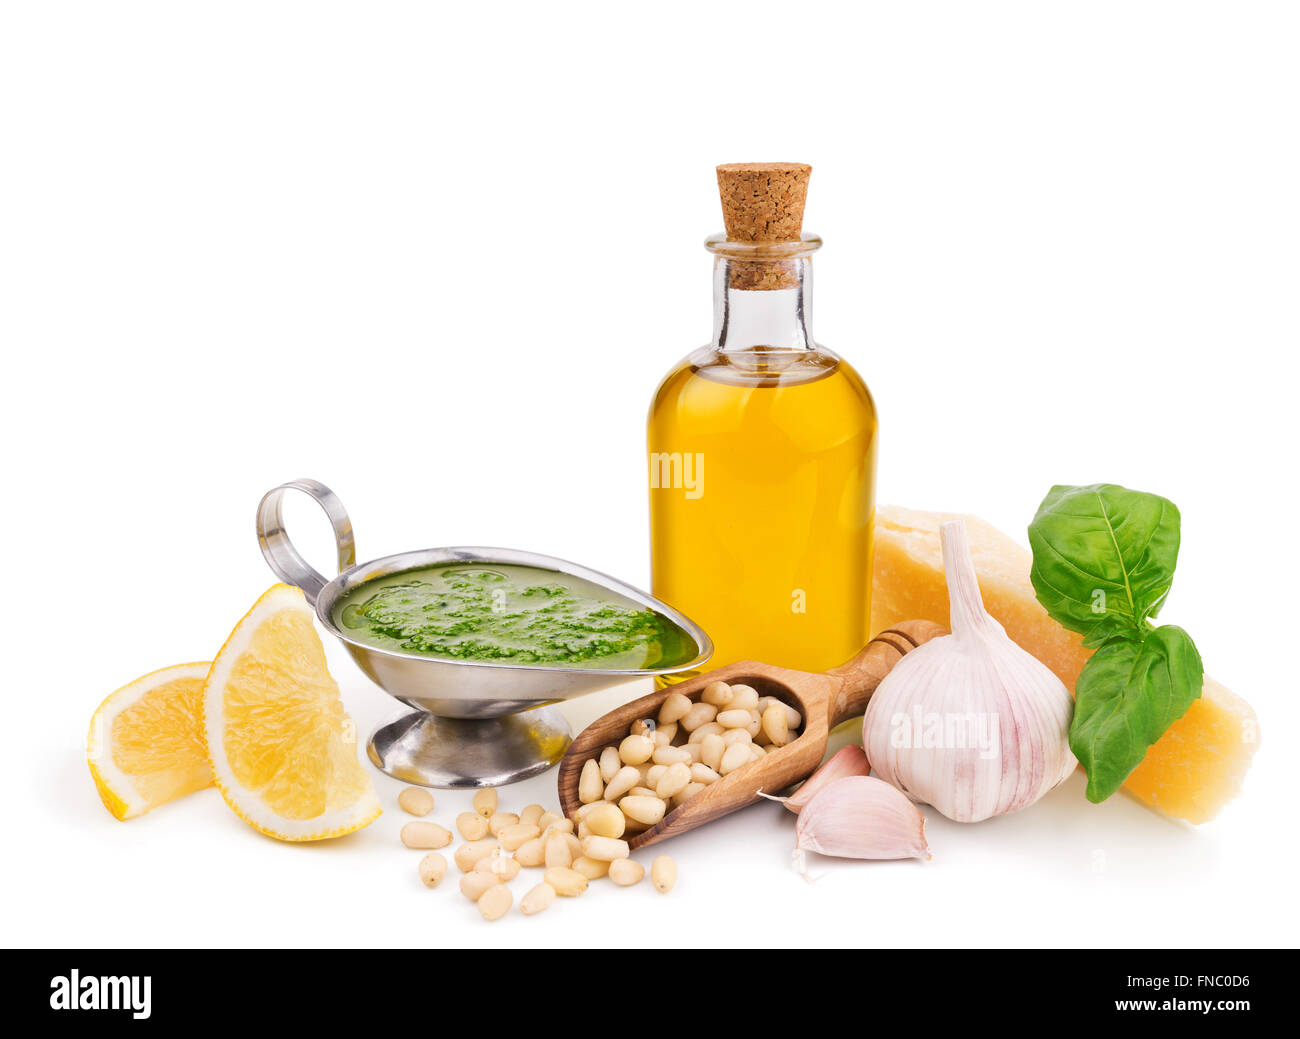 pesto sauce and its ingredients isolated on white Stock Photo